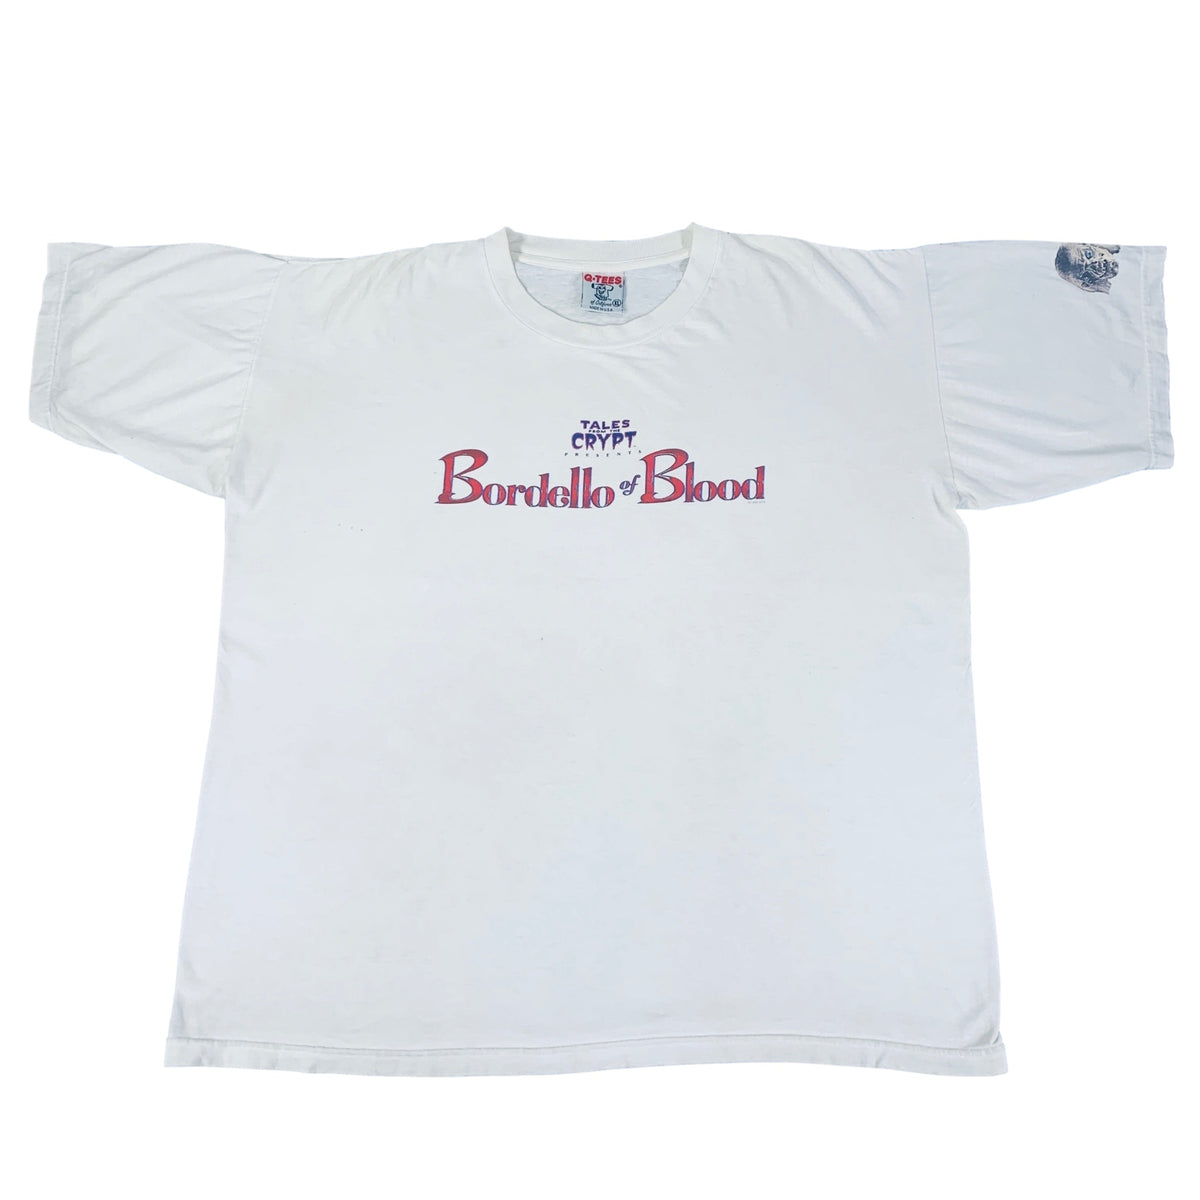 Vintage Tales From The Crypt &quot;Bordello Of Blood&quot; T-Shirt - jointcustodydc